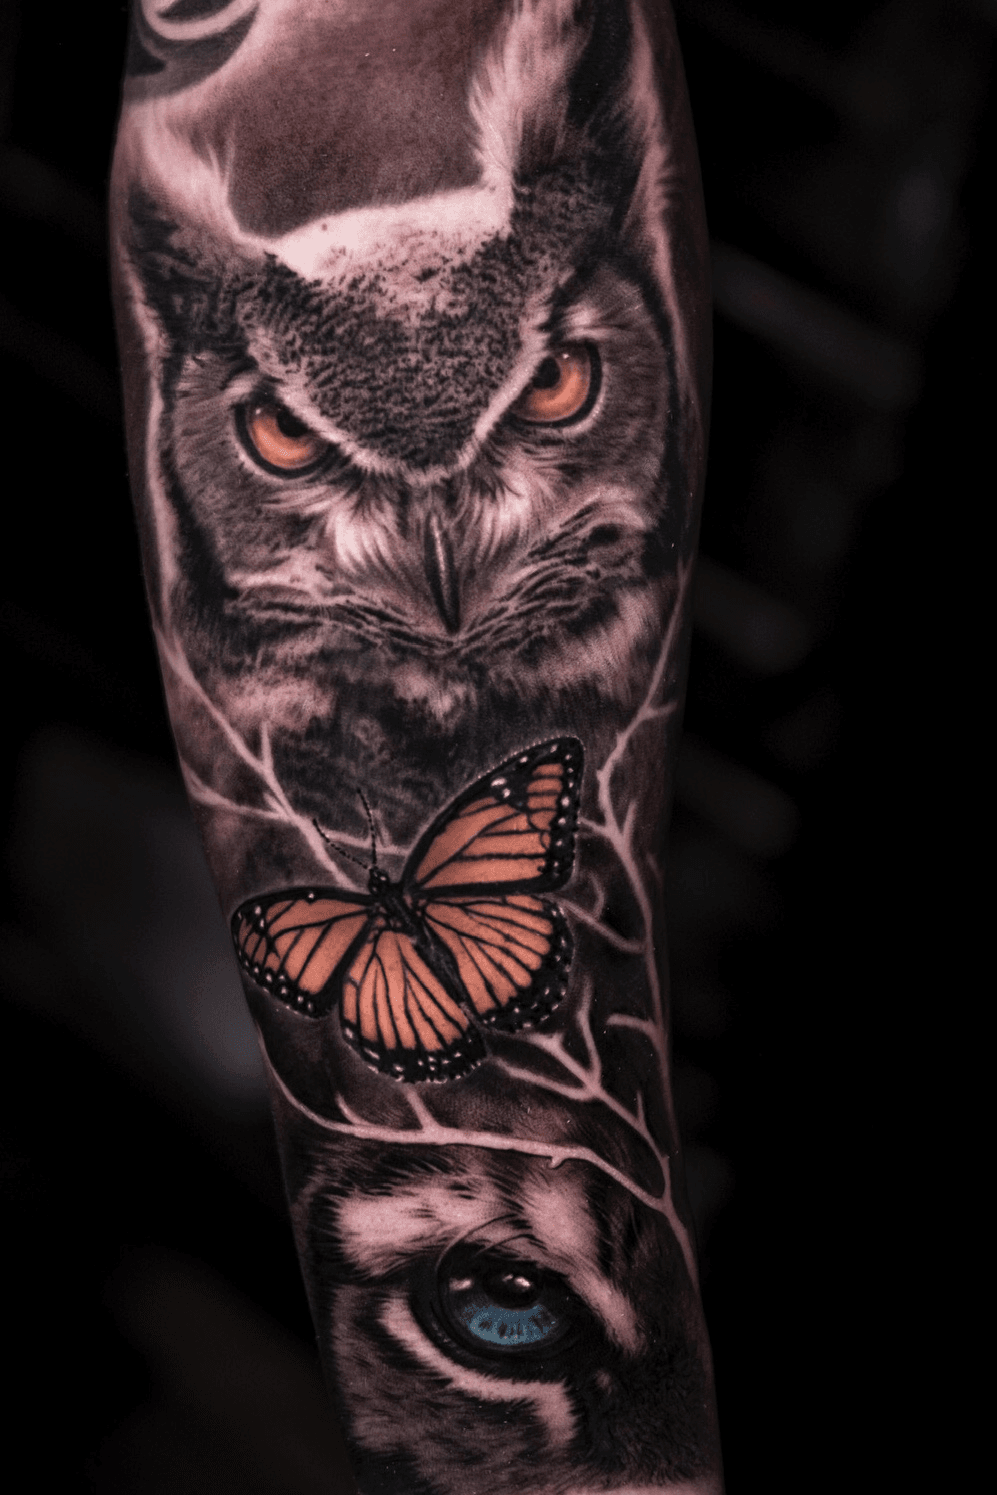 25 Attractive and Creative Owl Tattoo Ideas with Their Meaning  Wittyduck